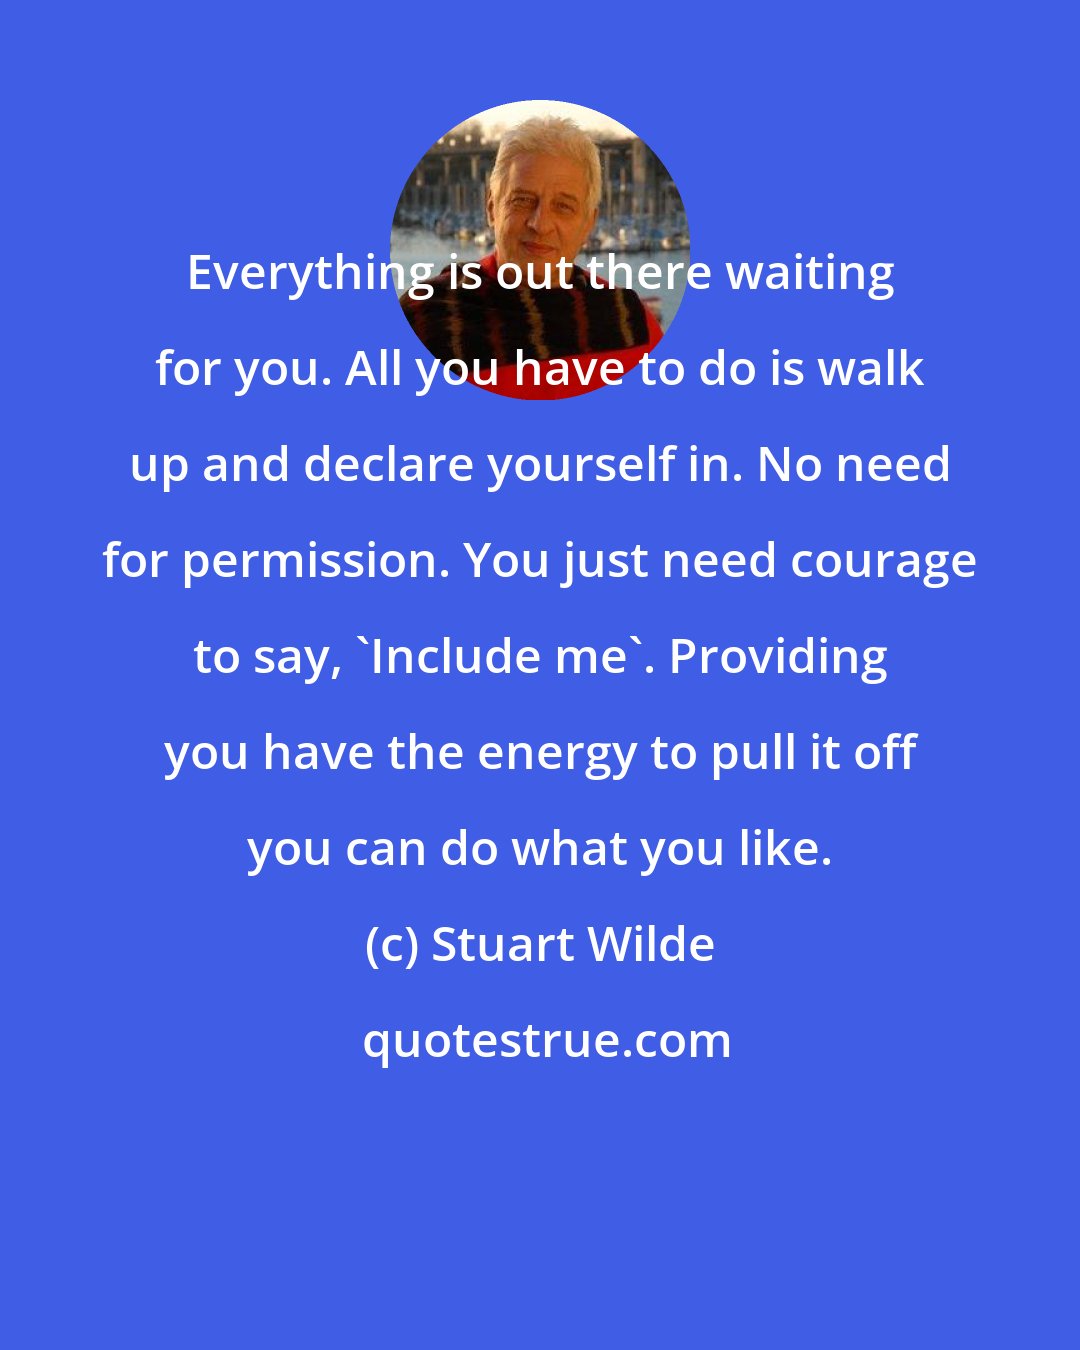 Stuart Wilde: Everything is out there waiting for you. All you have to do is walk up and declare yourself in. No need for permission. You just need courage to say, 'Include me'. Providing you have the energy to pull it off you can do what you like.